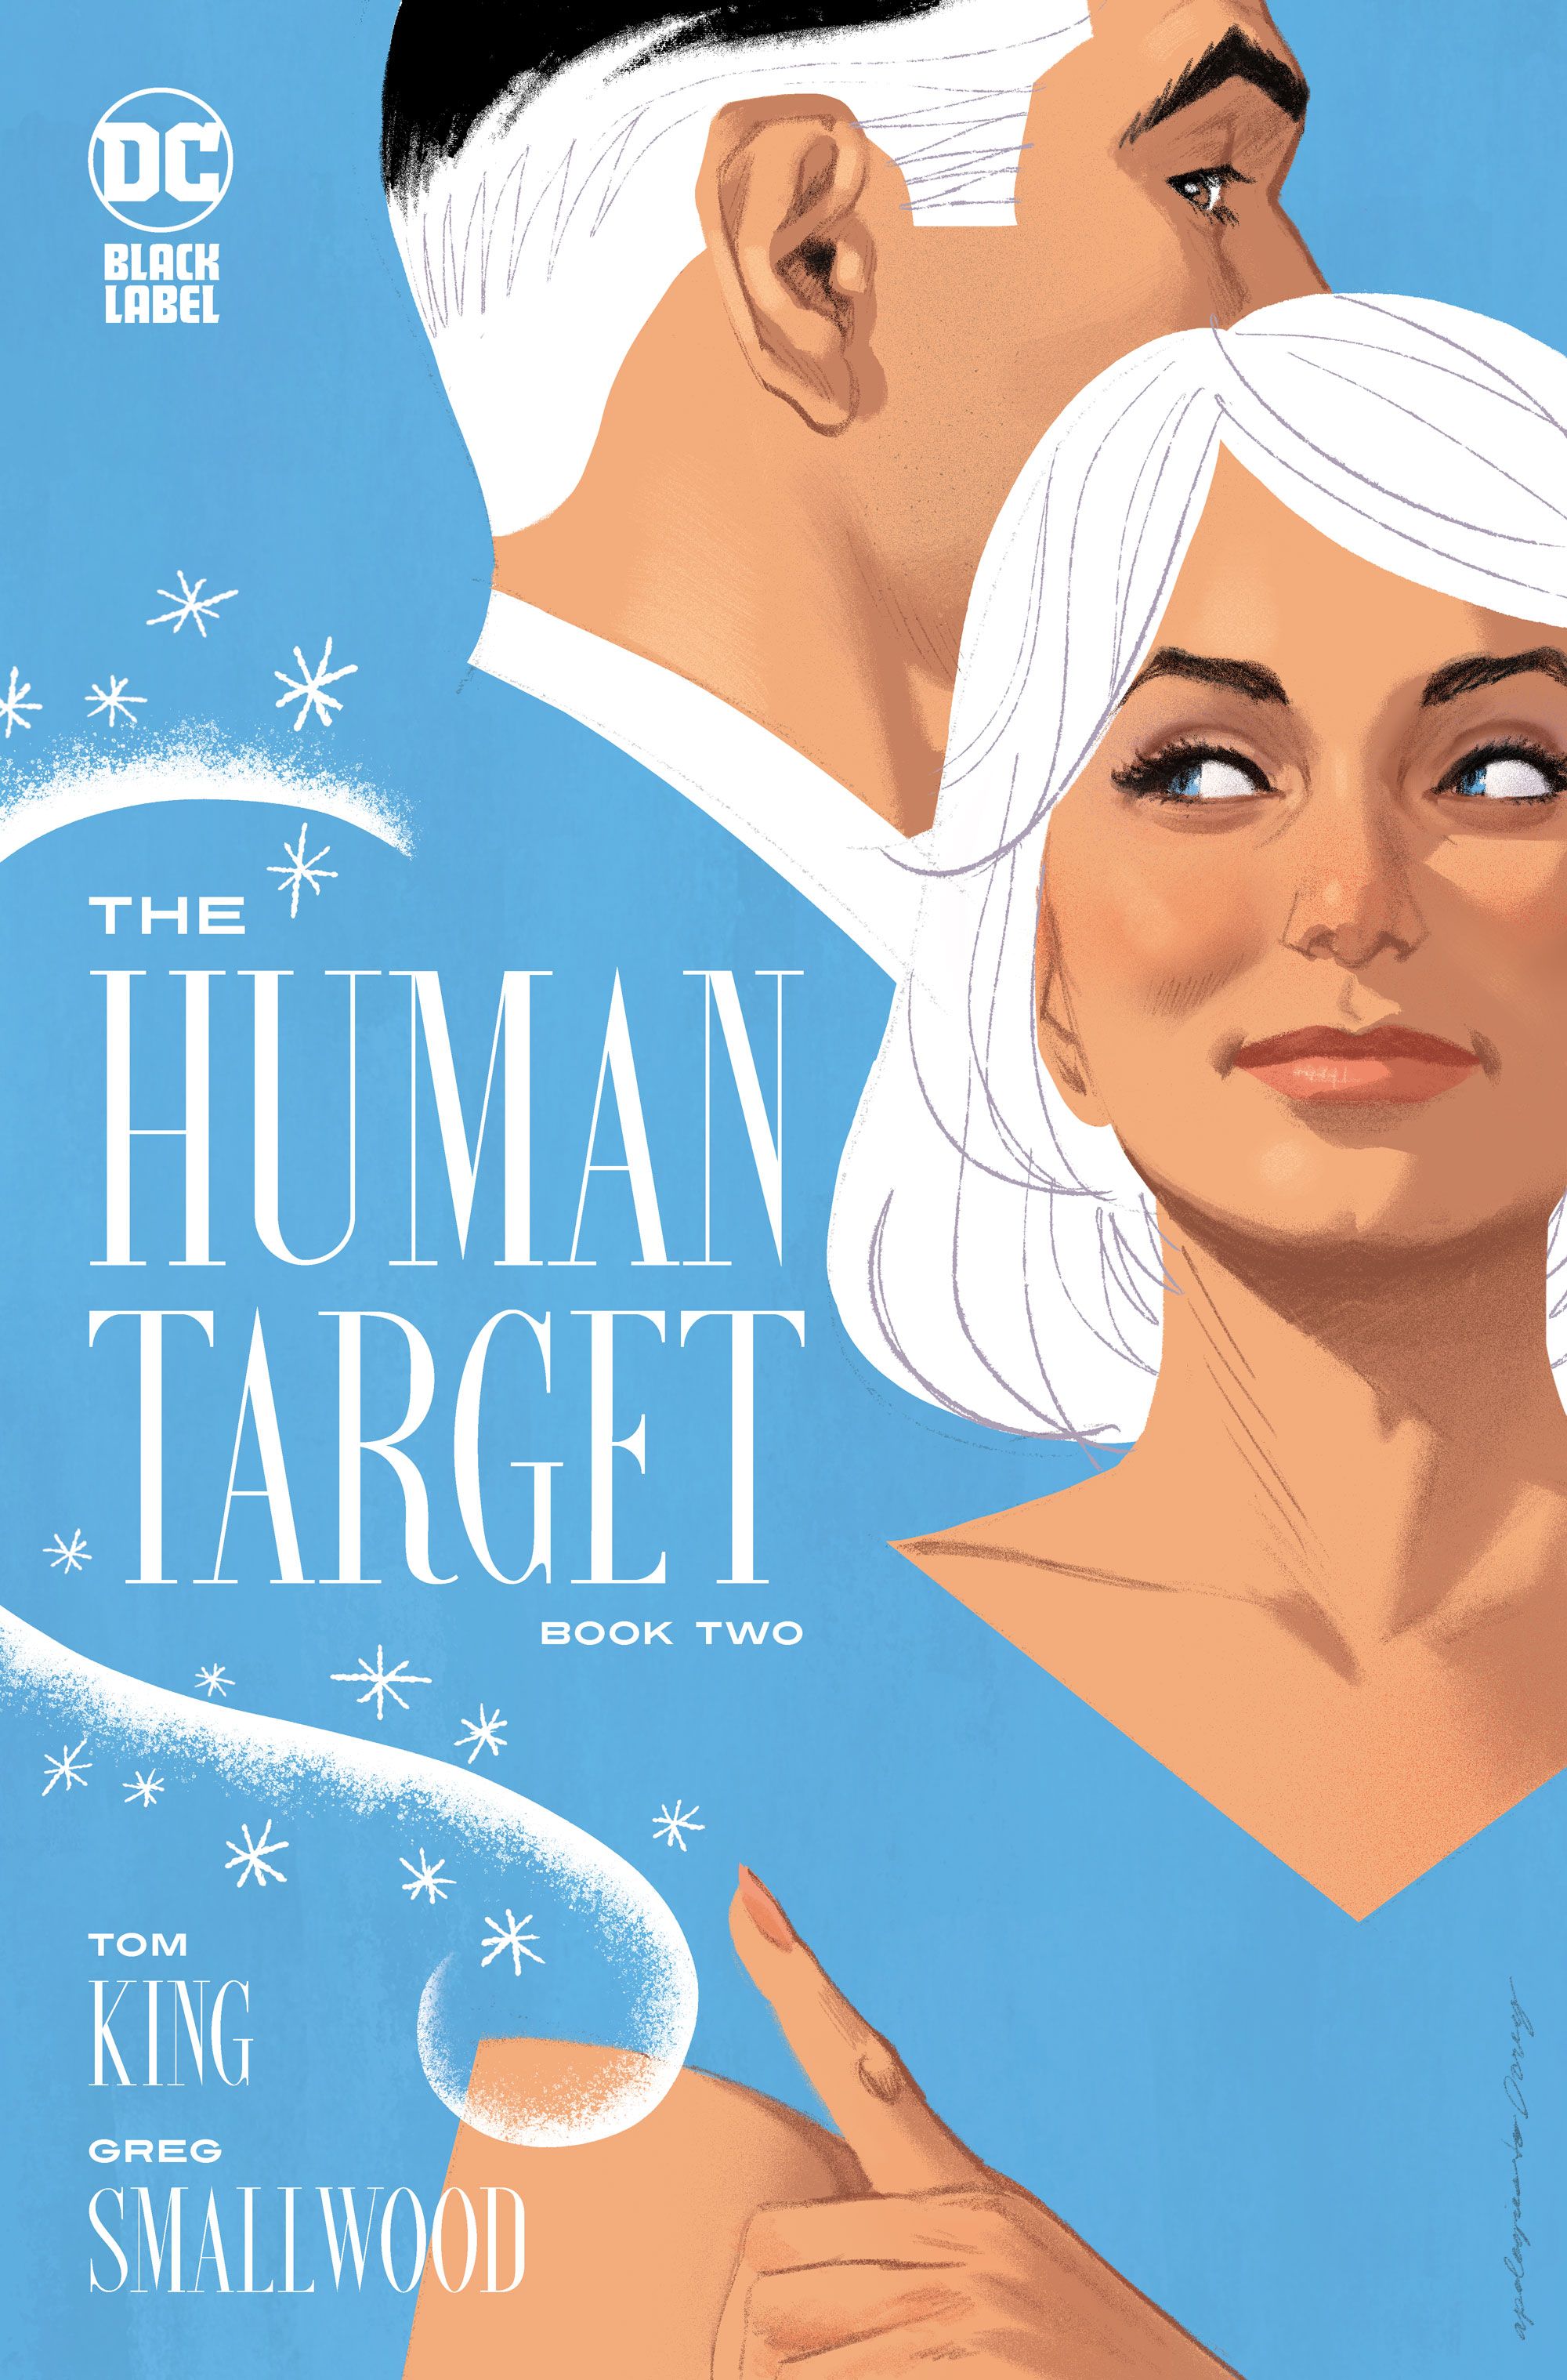 The Human Target cover 2